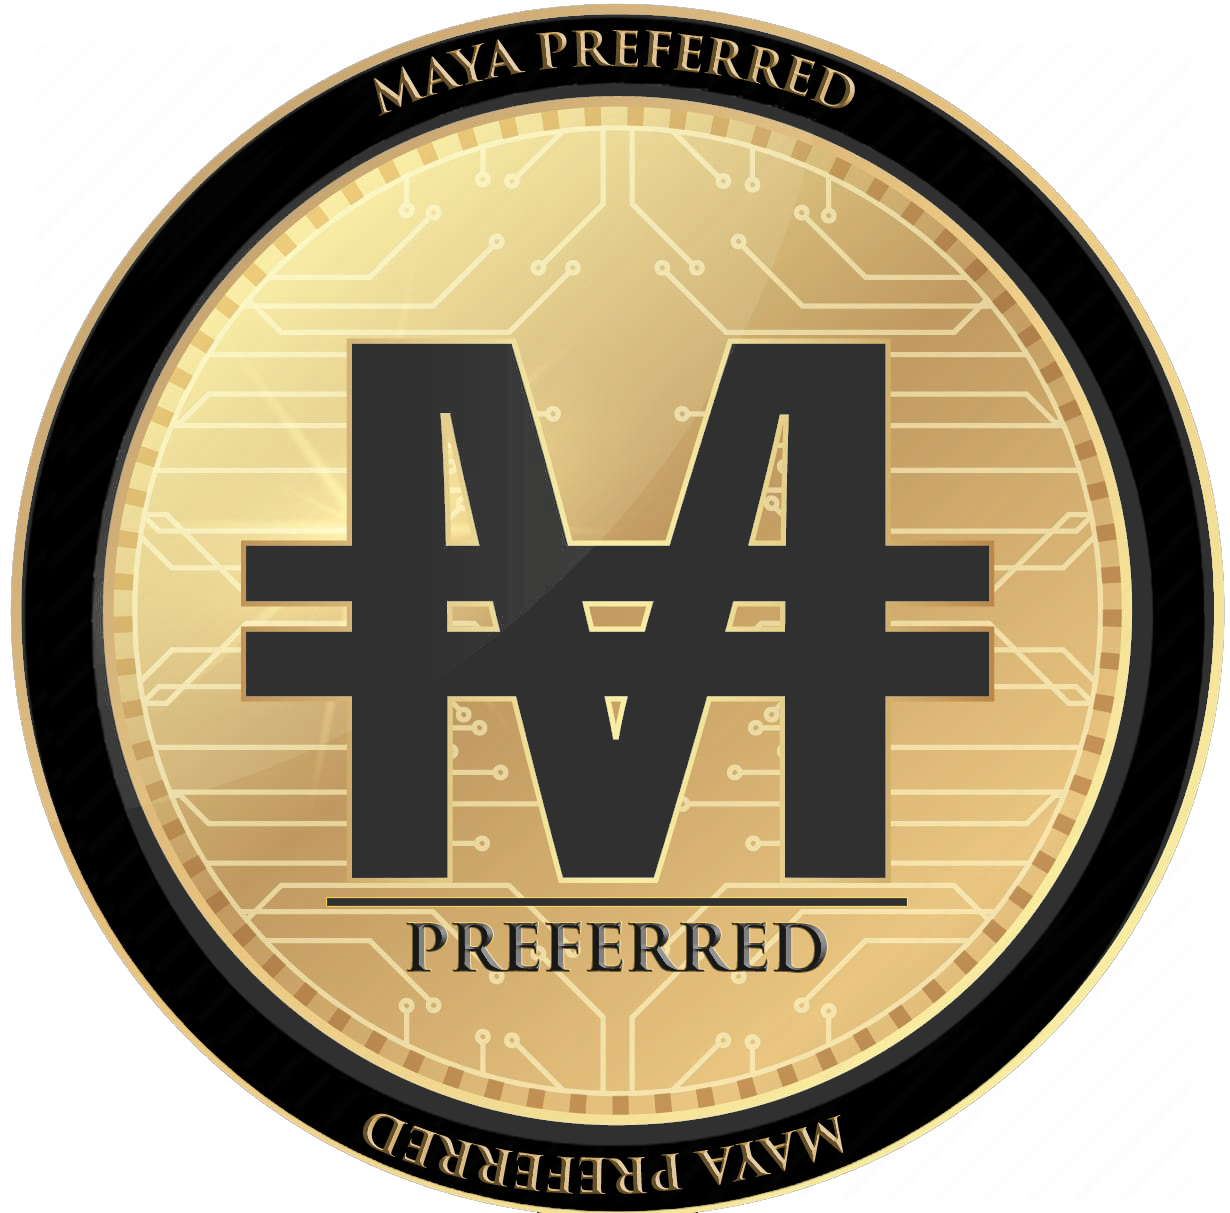 Maya Preferred 223 (MAPR) and Bitcoin are now working together 